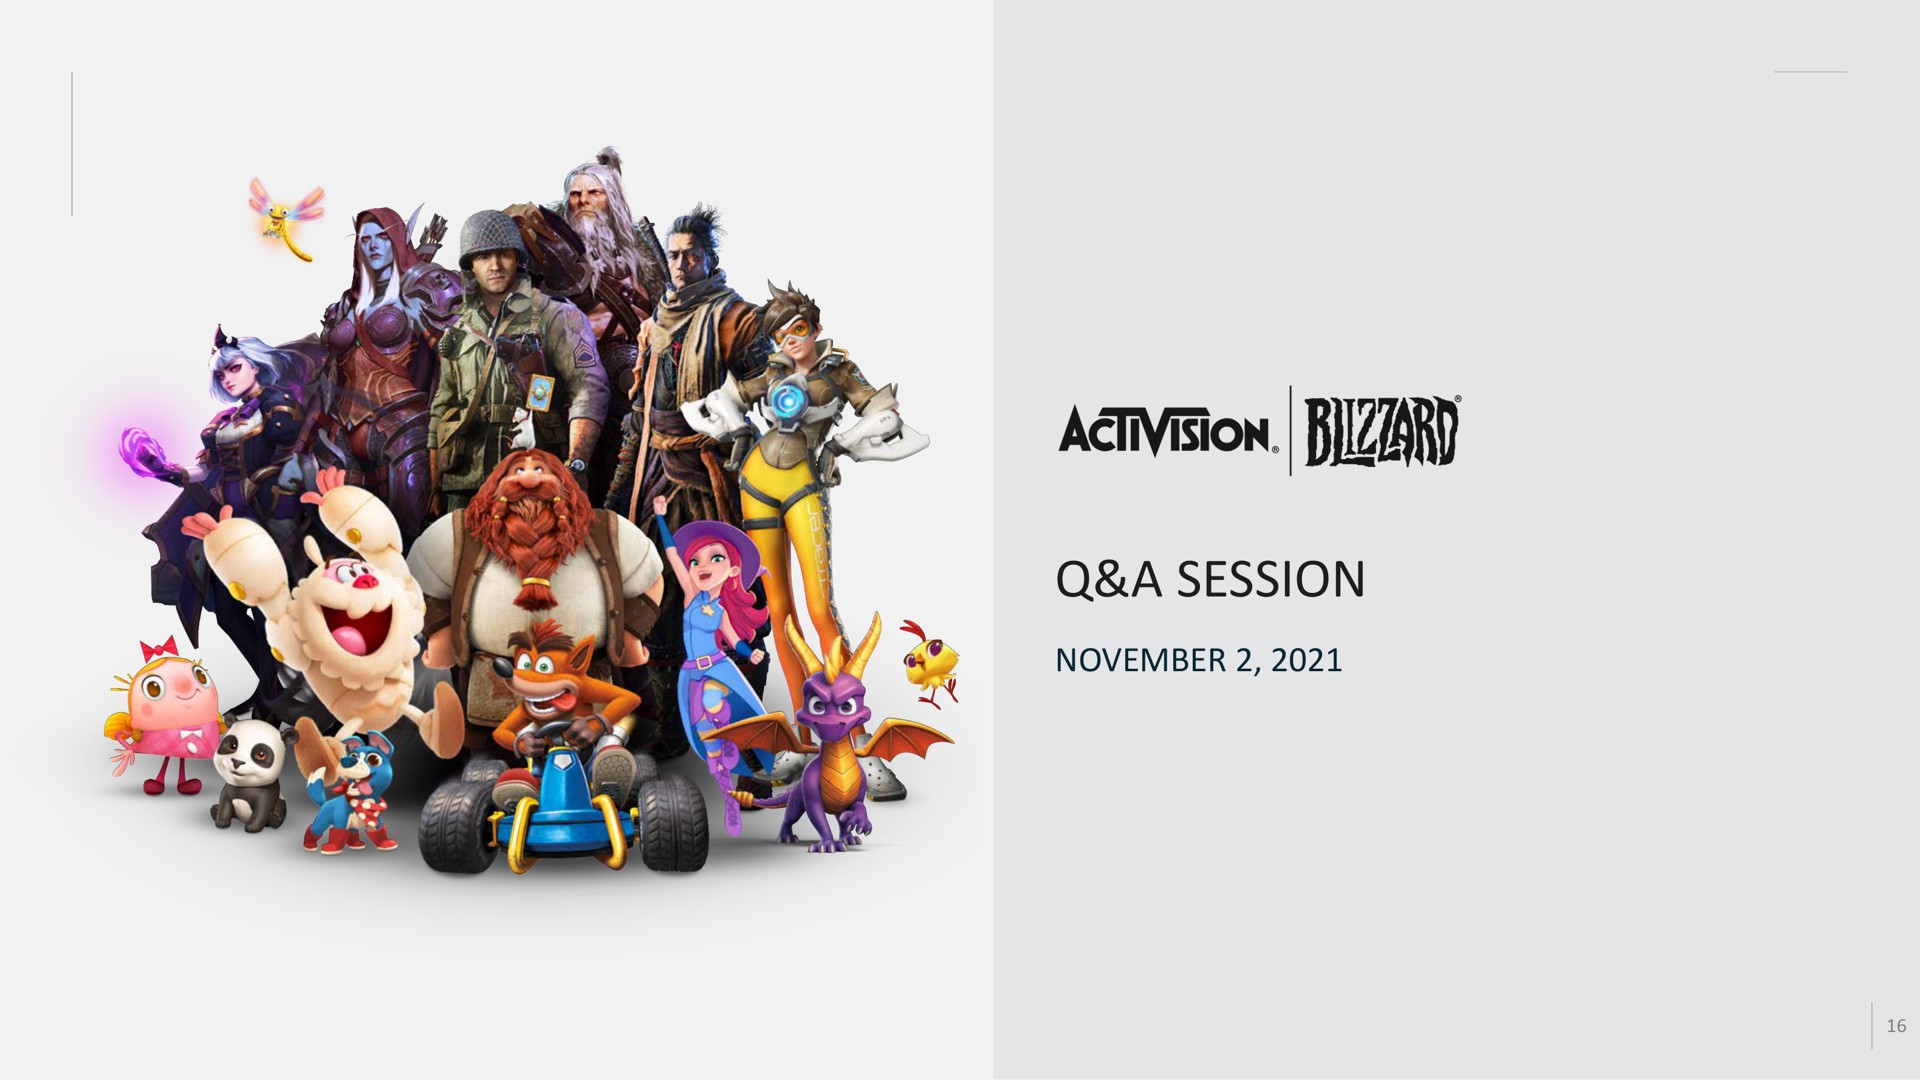 a session | Activision Blizzard